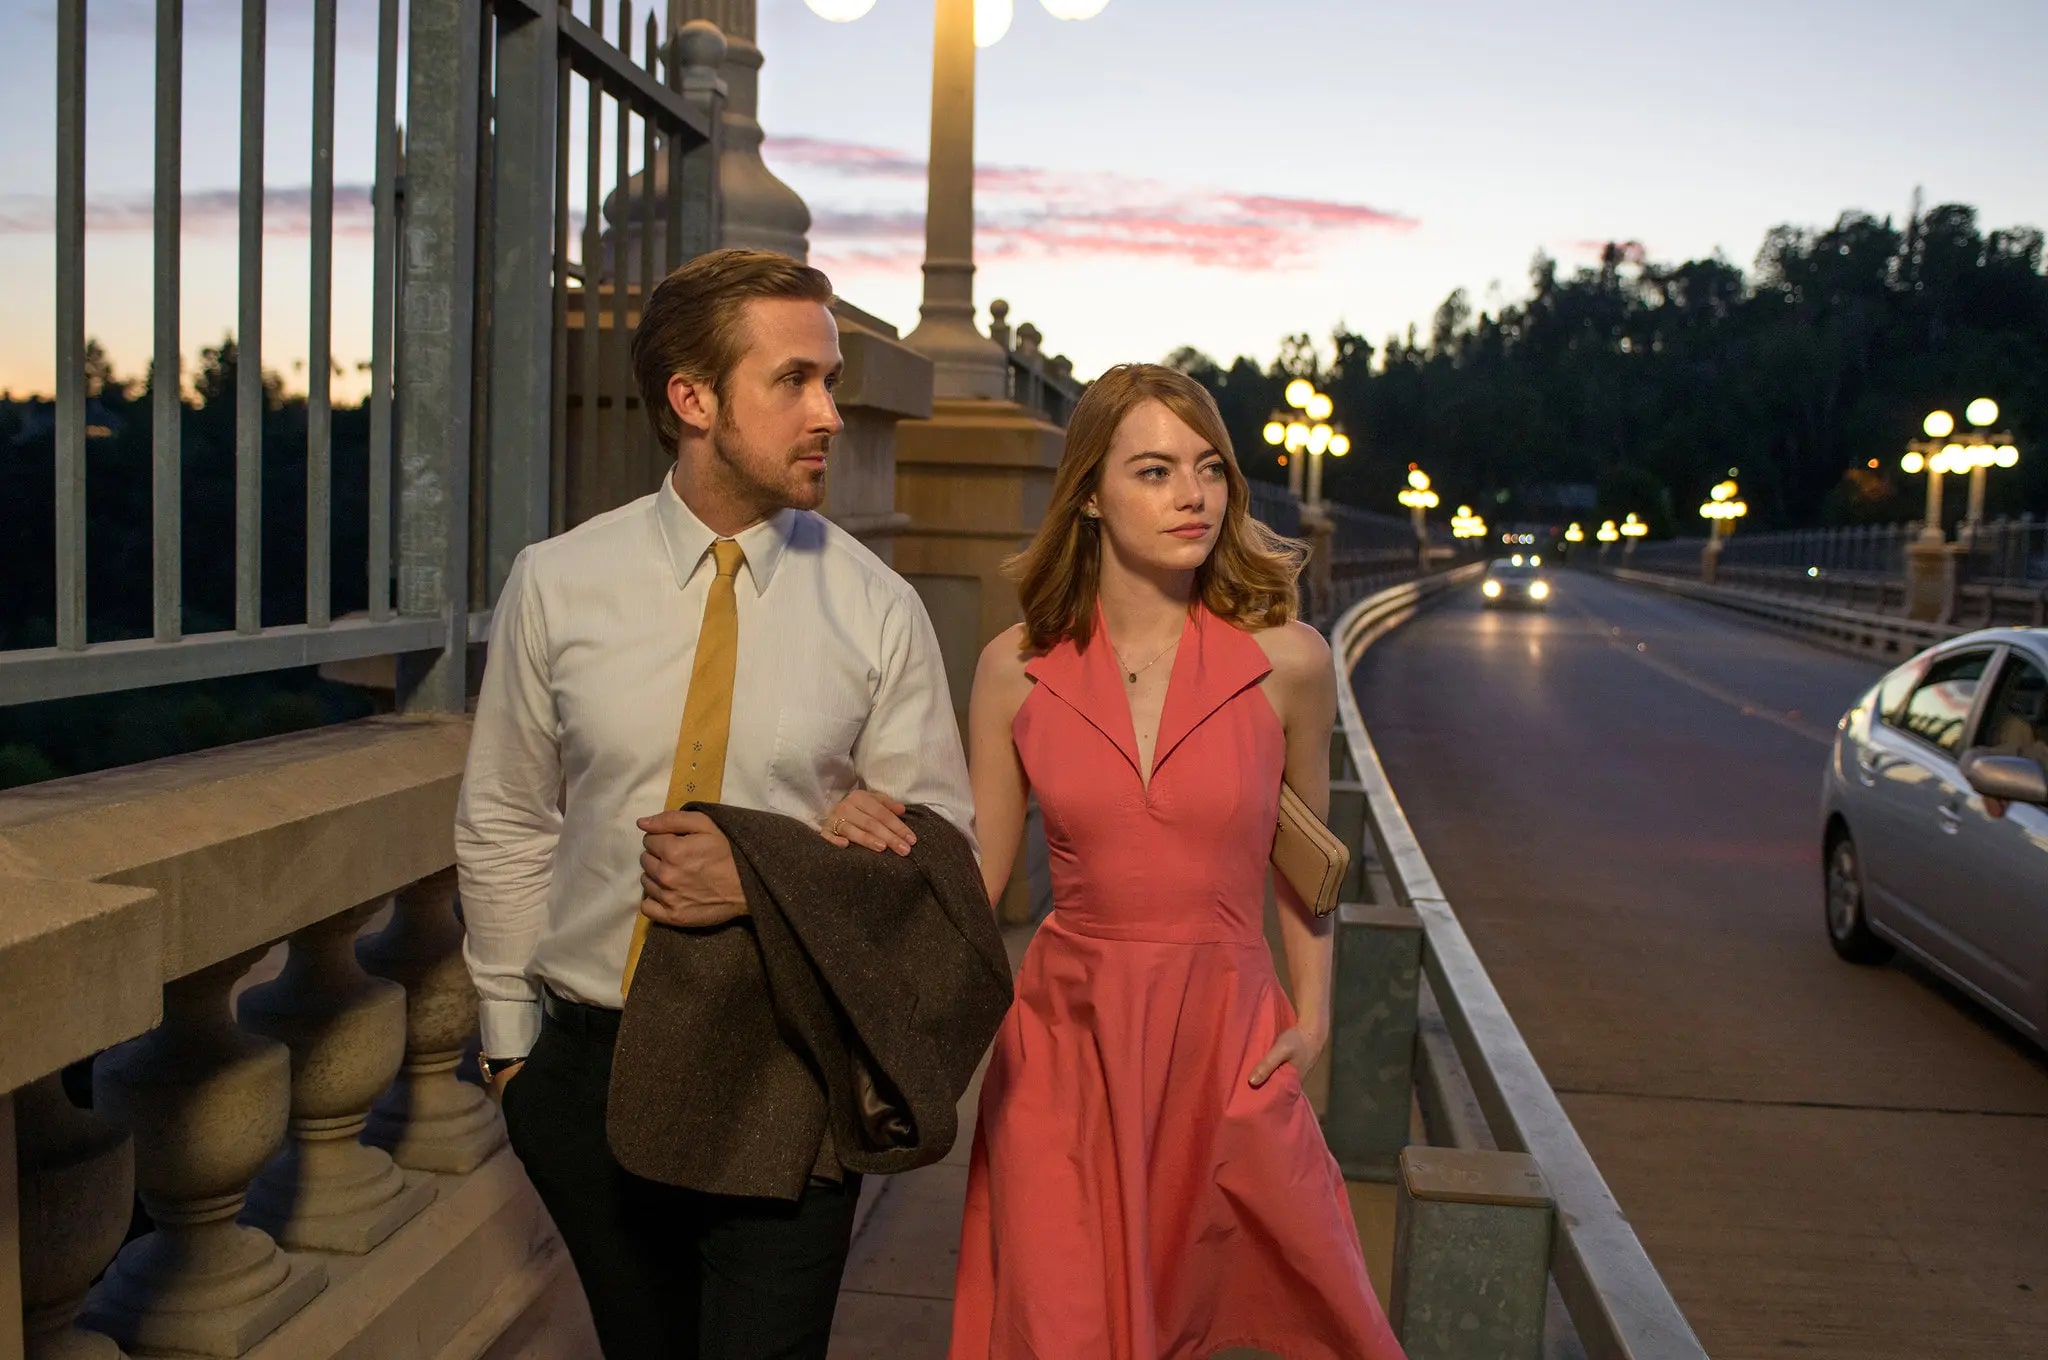 La La Land: Is the 2016 Musical Movie Based on a True Story?